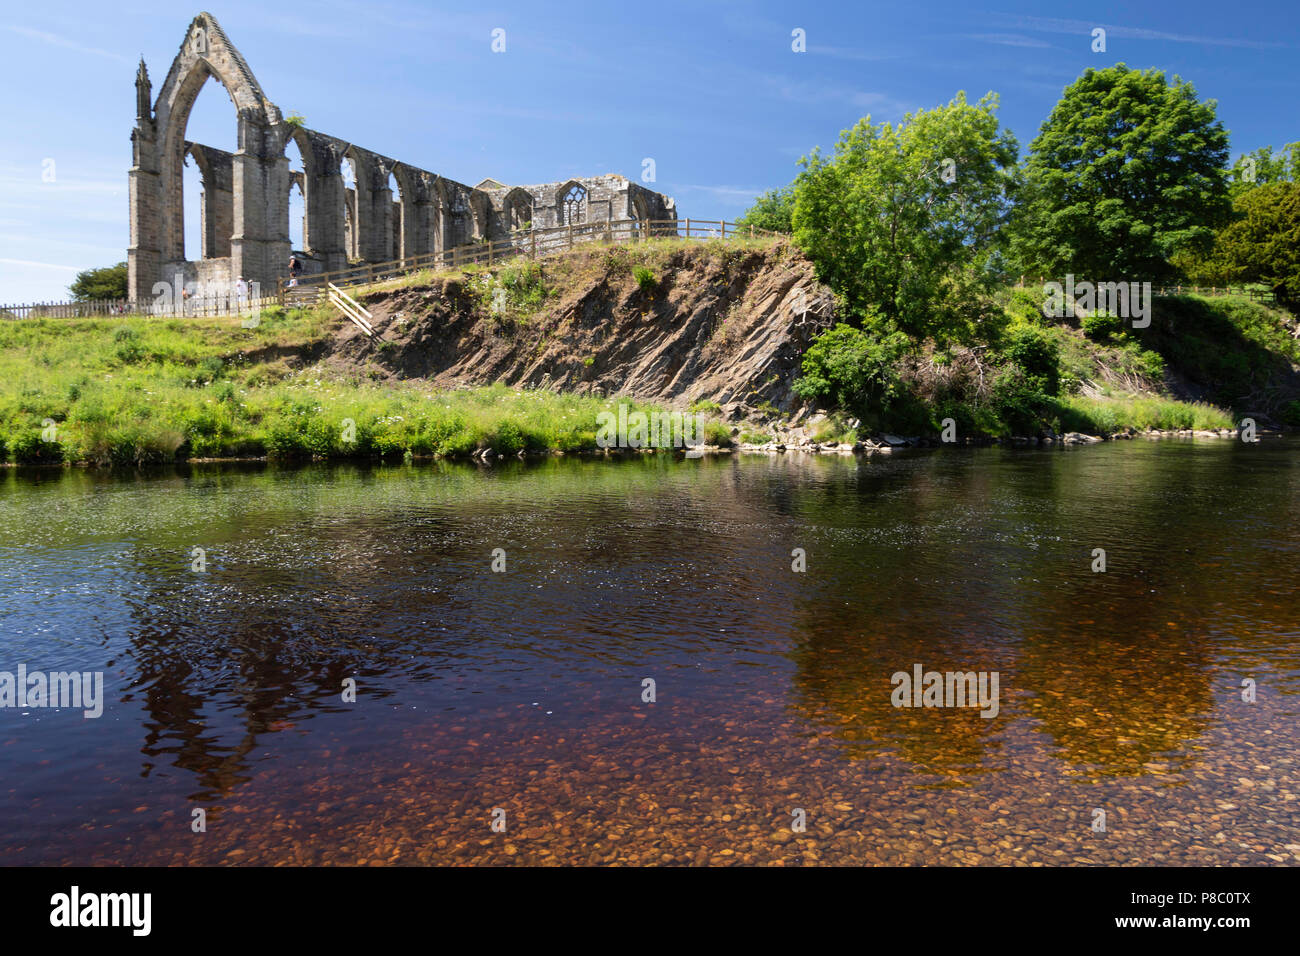 The River Wharfe with Bolton Abbey in the background, Skipton, North Yorkshire, England, UK. Stock Photo